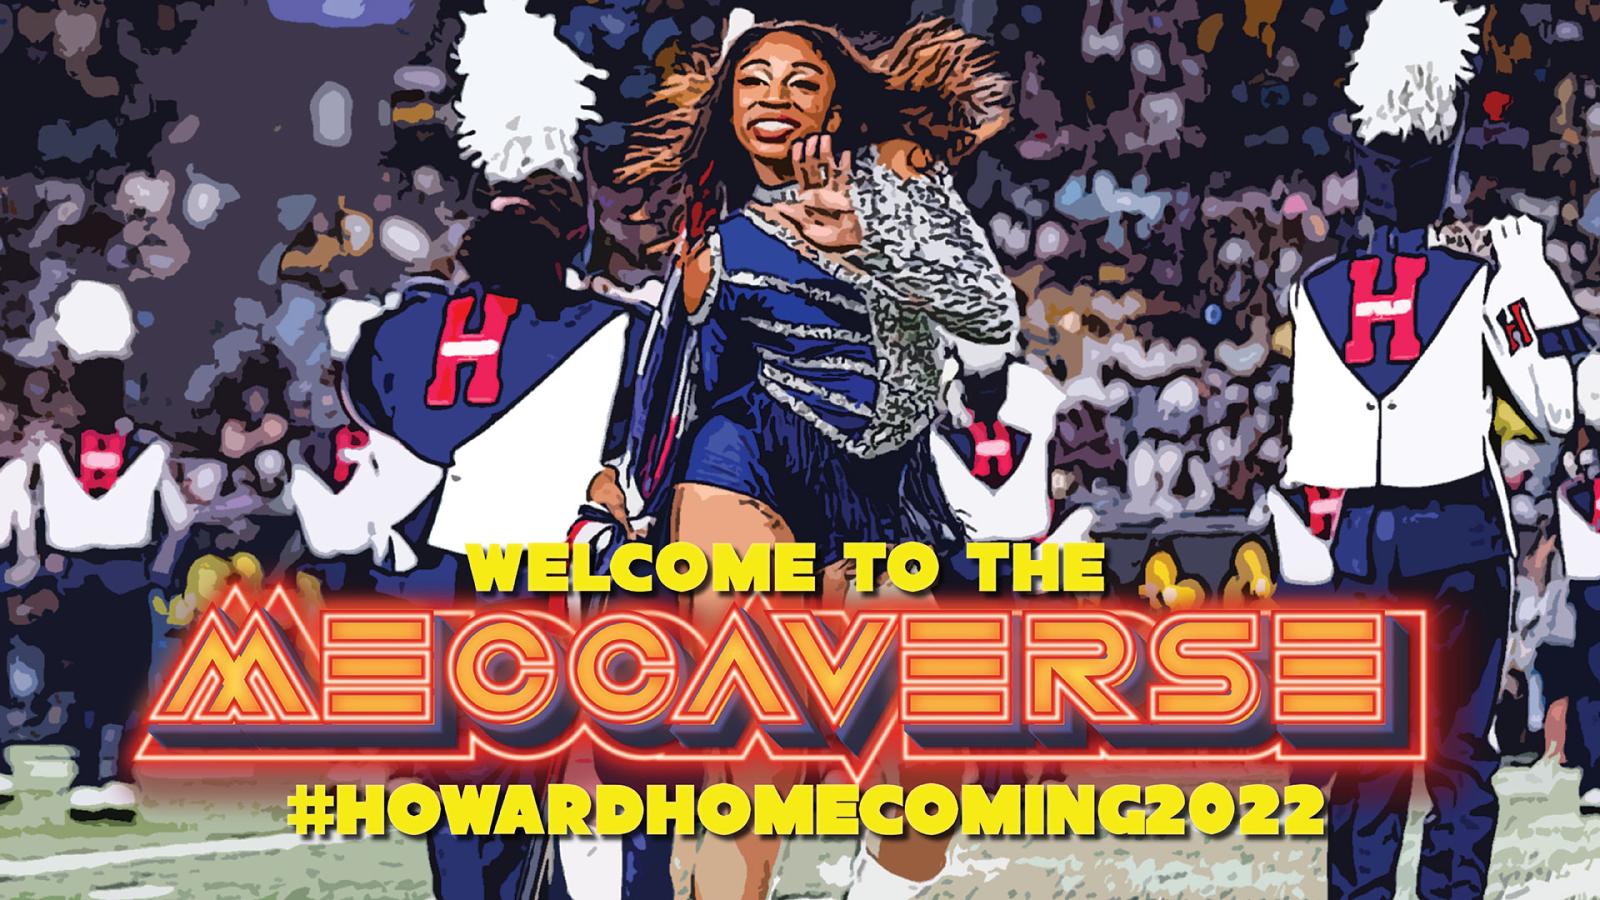 Welcome to The Meccaverse #HowardHomecoming2022